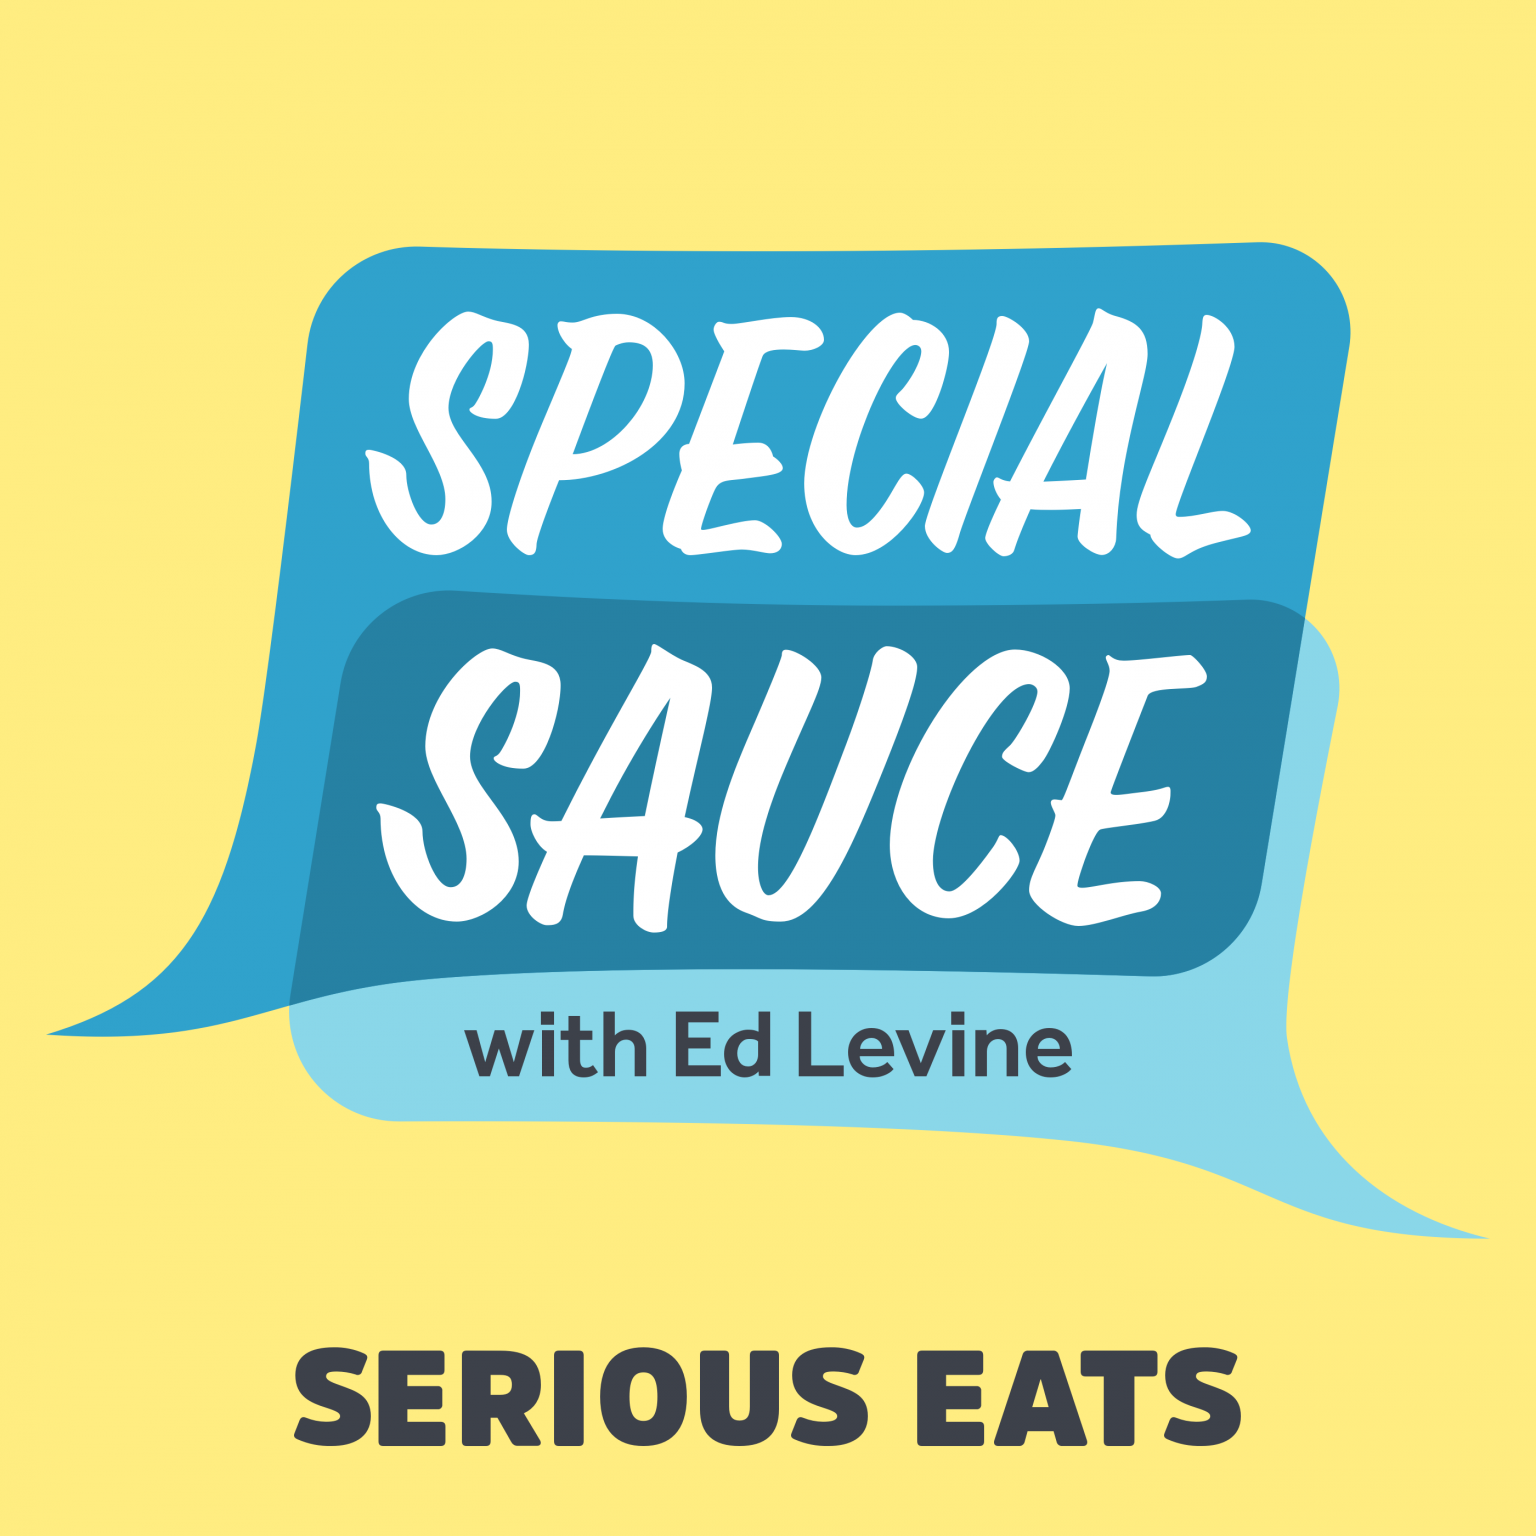 Lolis Eric Elie on New Orleans food & diversity in Hollywood, Kenji on Red Beans & Rice